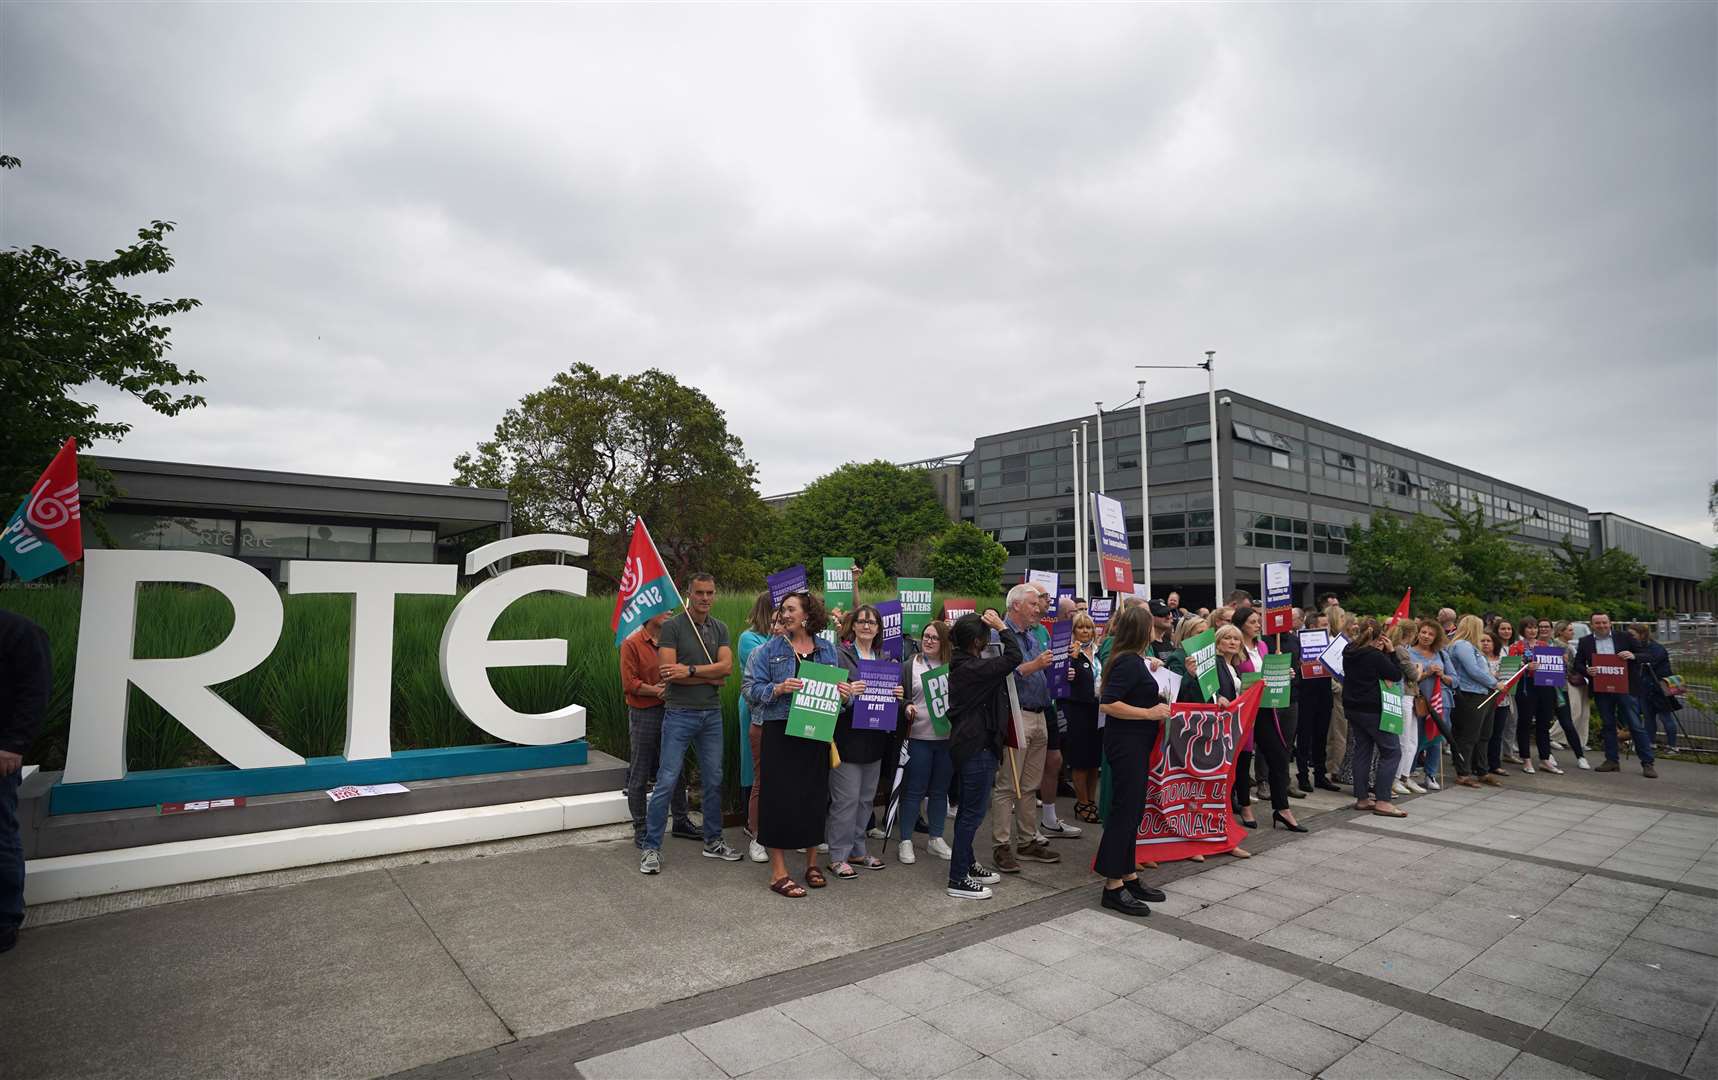 Members of staff from RTE take part in a protest at the broadcaster’s headquarters in Donnybrook, Dublin (Niall Carson/PA)